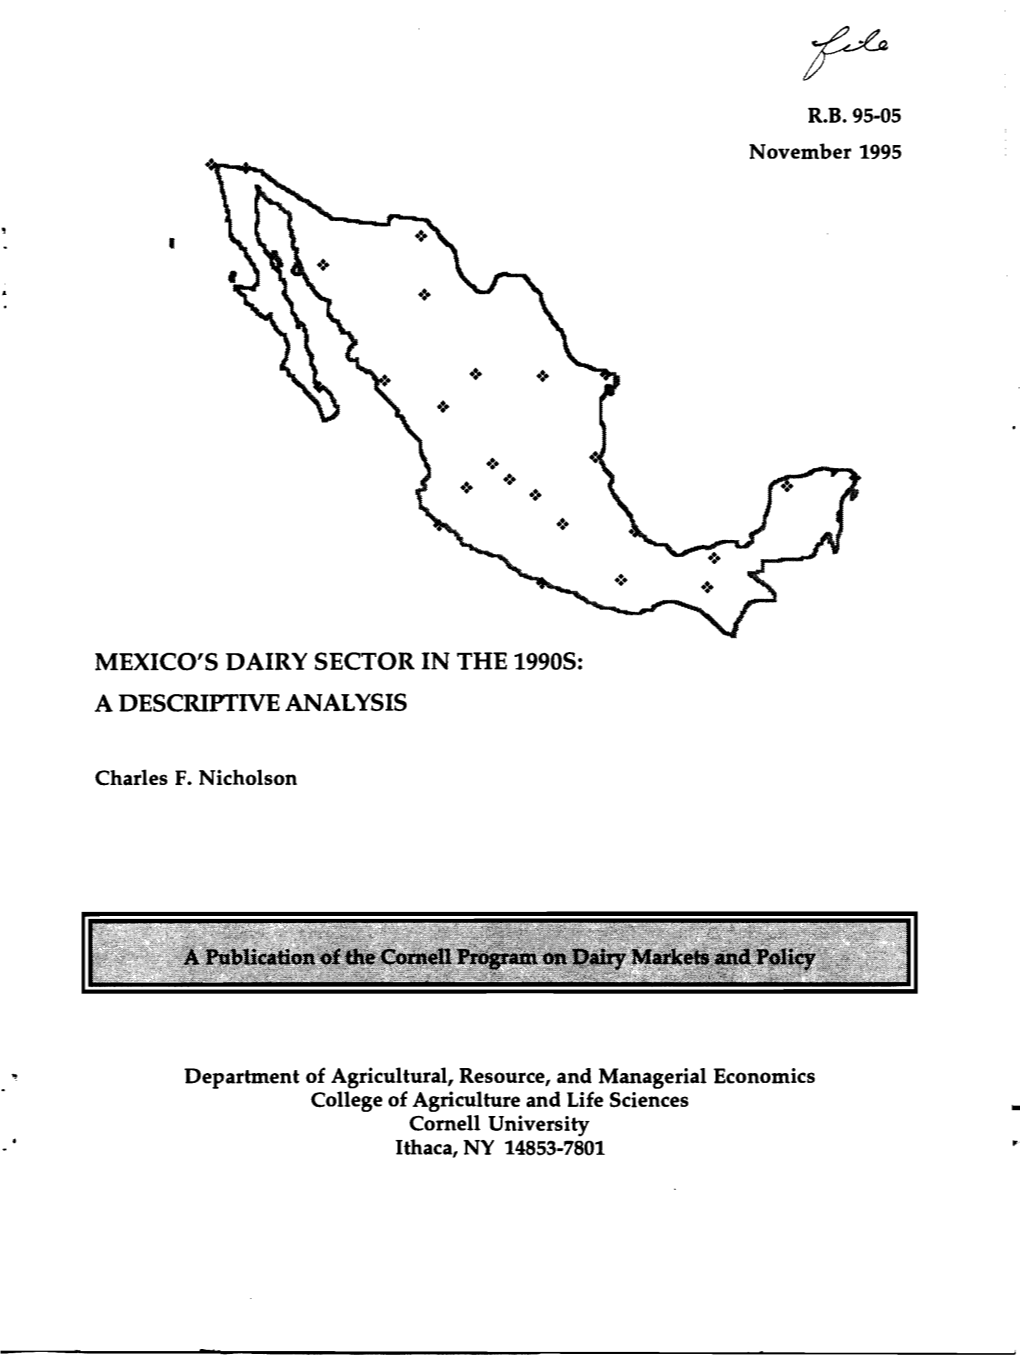 Mexico's Dairy Sector in the 1990S: a Descriptive Analysis